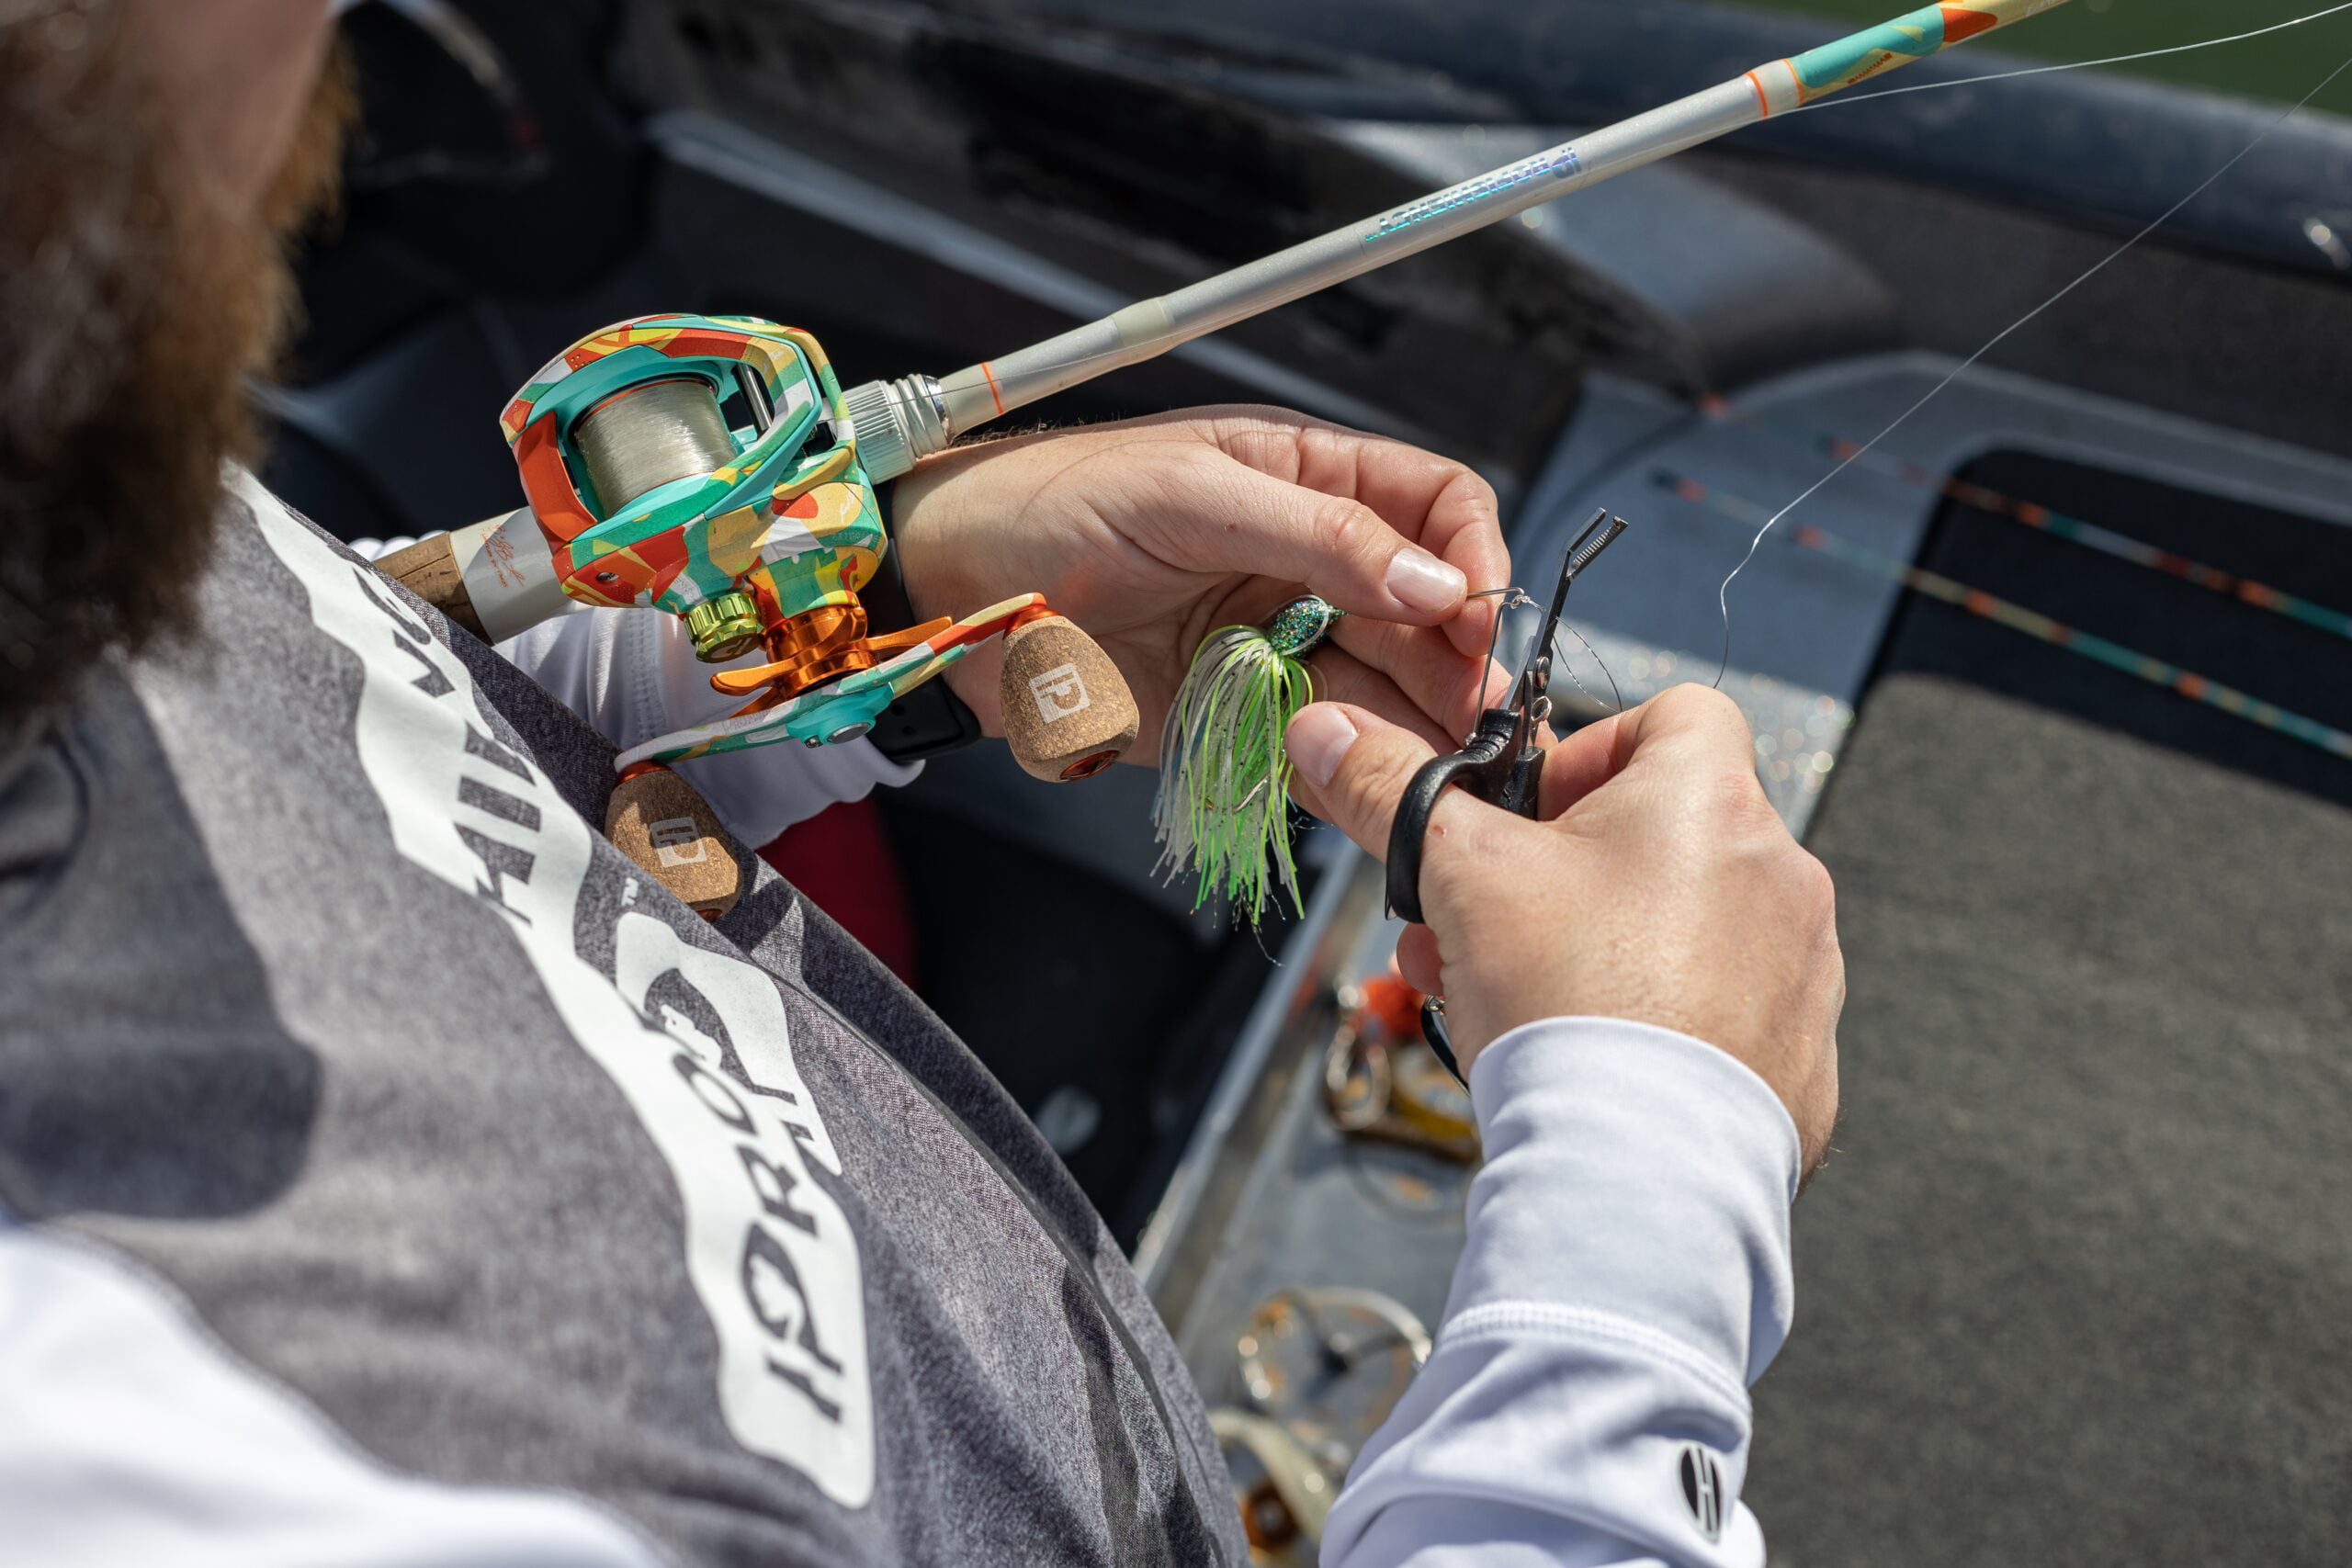 ProFISHiency KRAZY Pro Series Baitcast Reel and Casting Combos Change the  Look of Fishing - Fishing Tackle Retailer - The Business Magazine of the  Sportfishing Industry